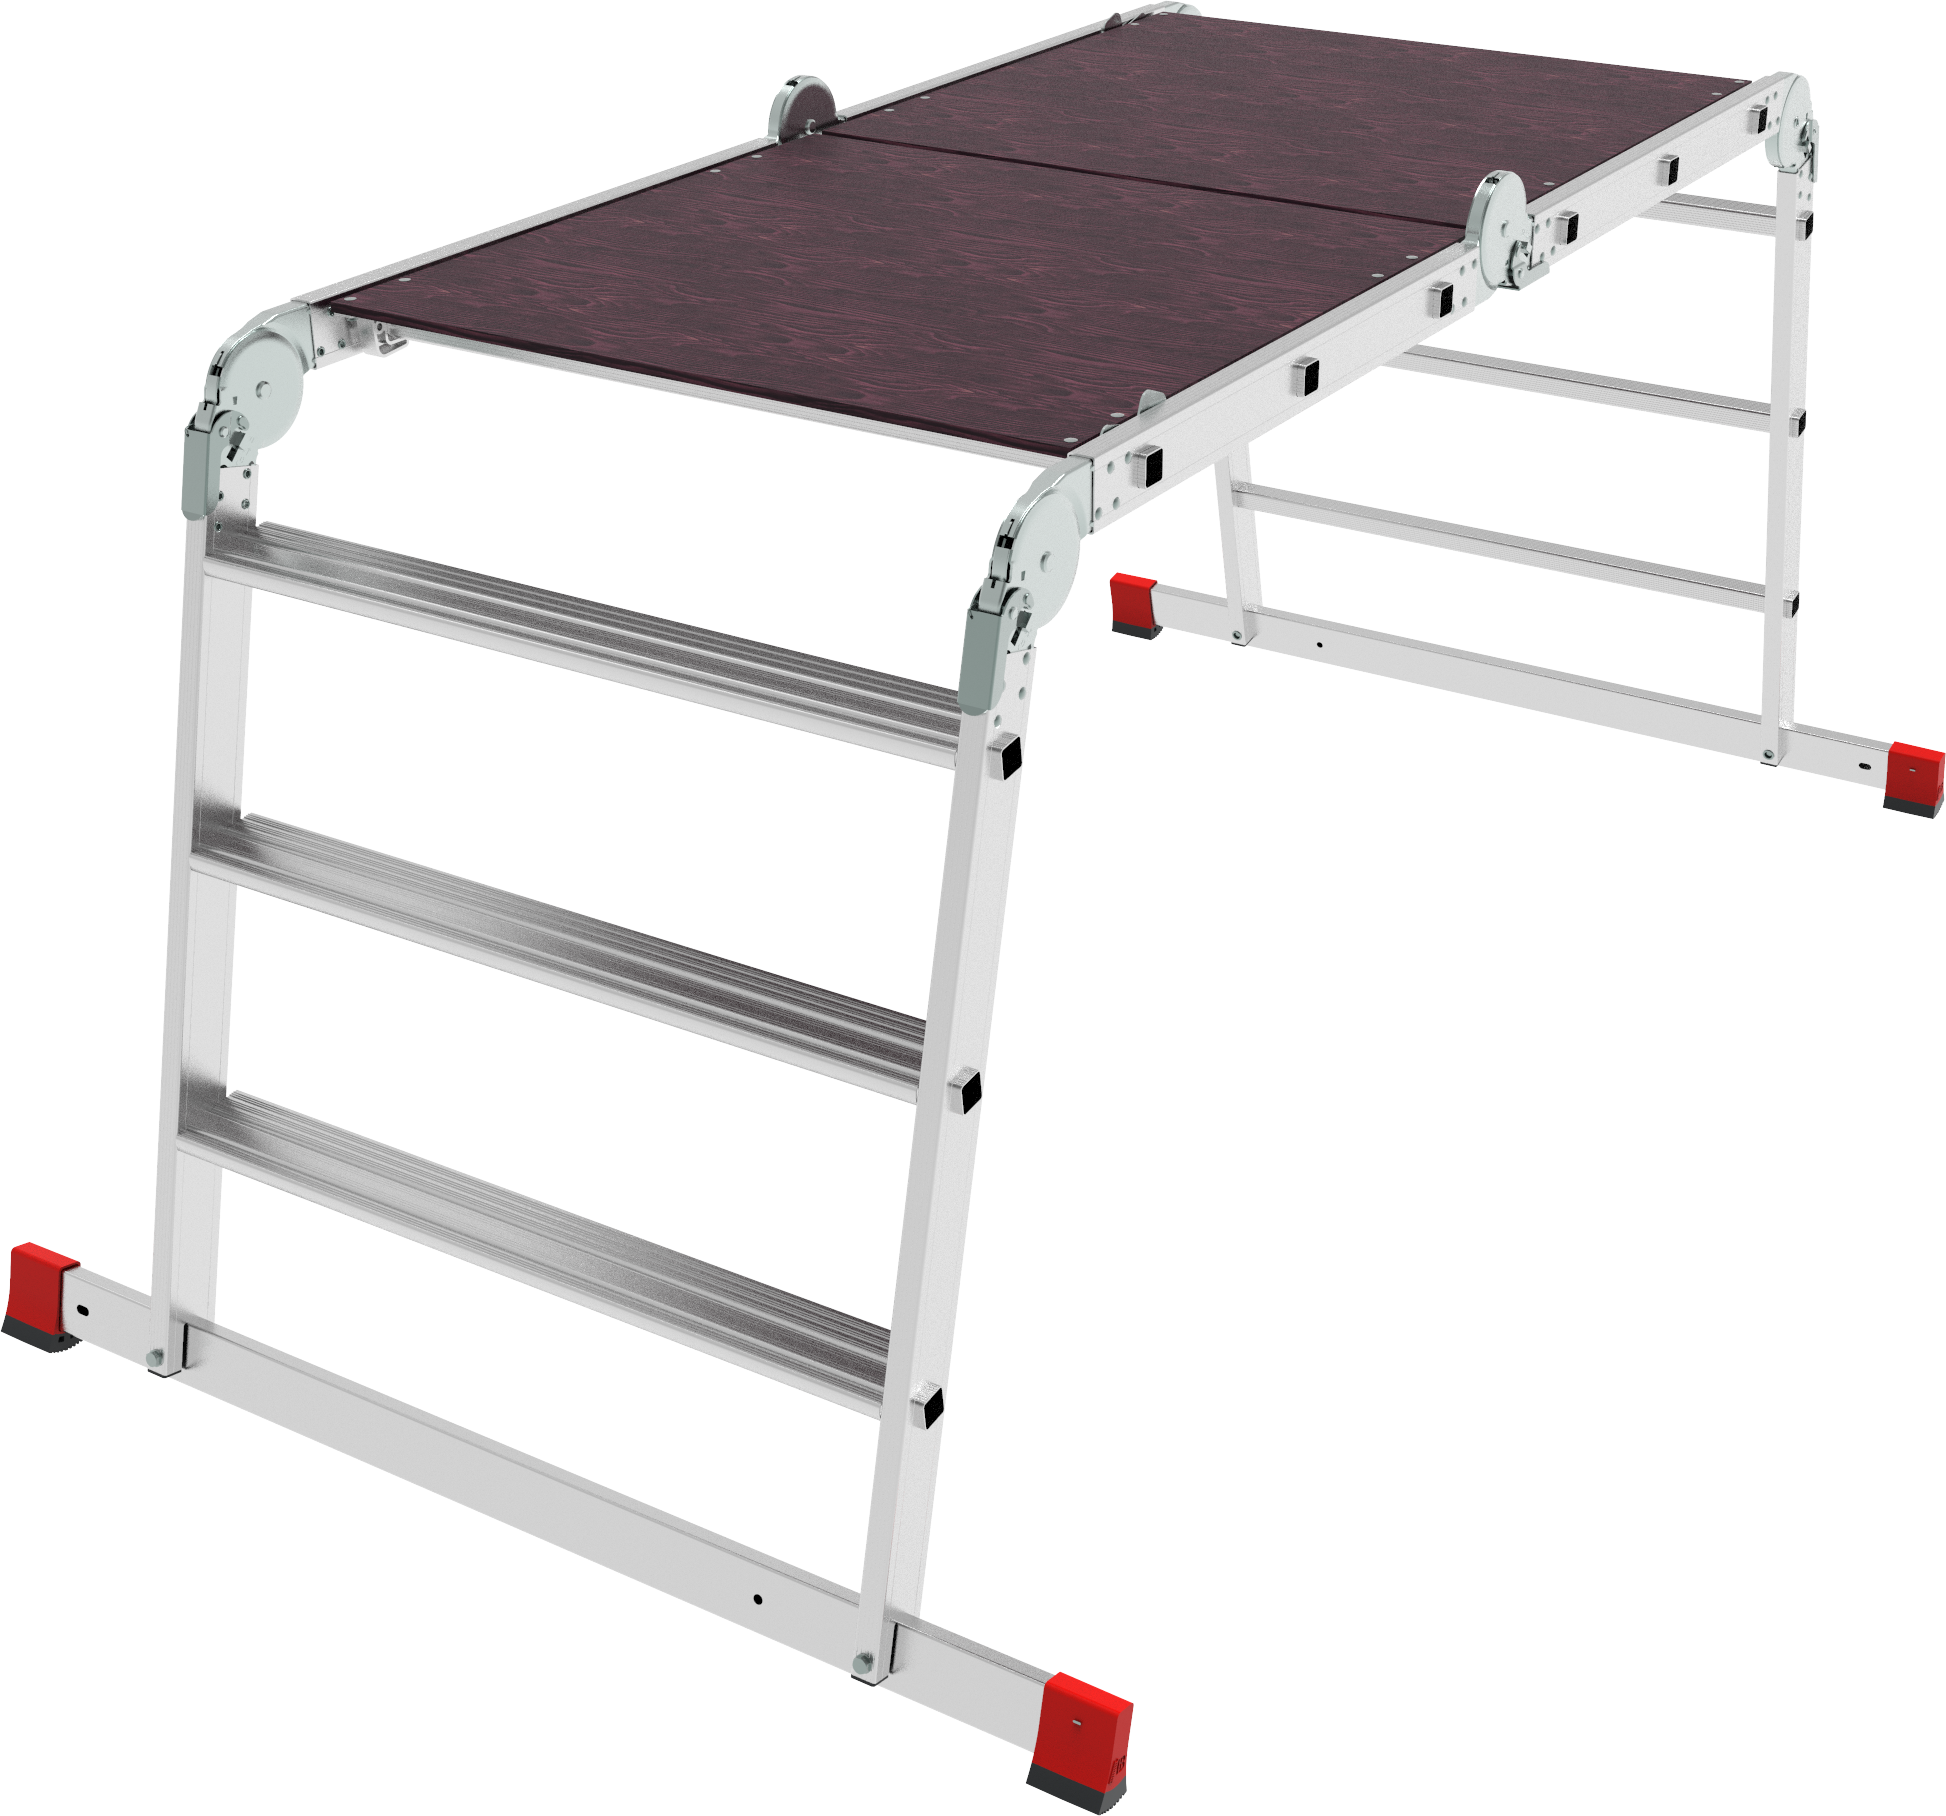 Multipurpose aluminum professional hinged rung ladder 800 mm width with 80 mm flanged steps and platform NV3336